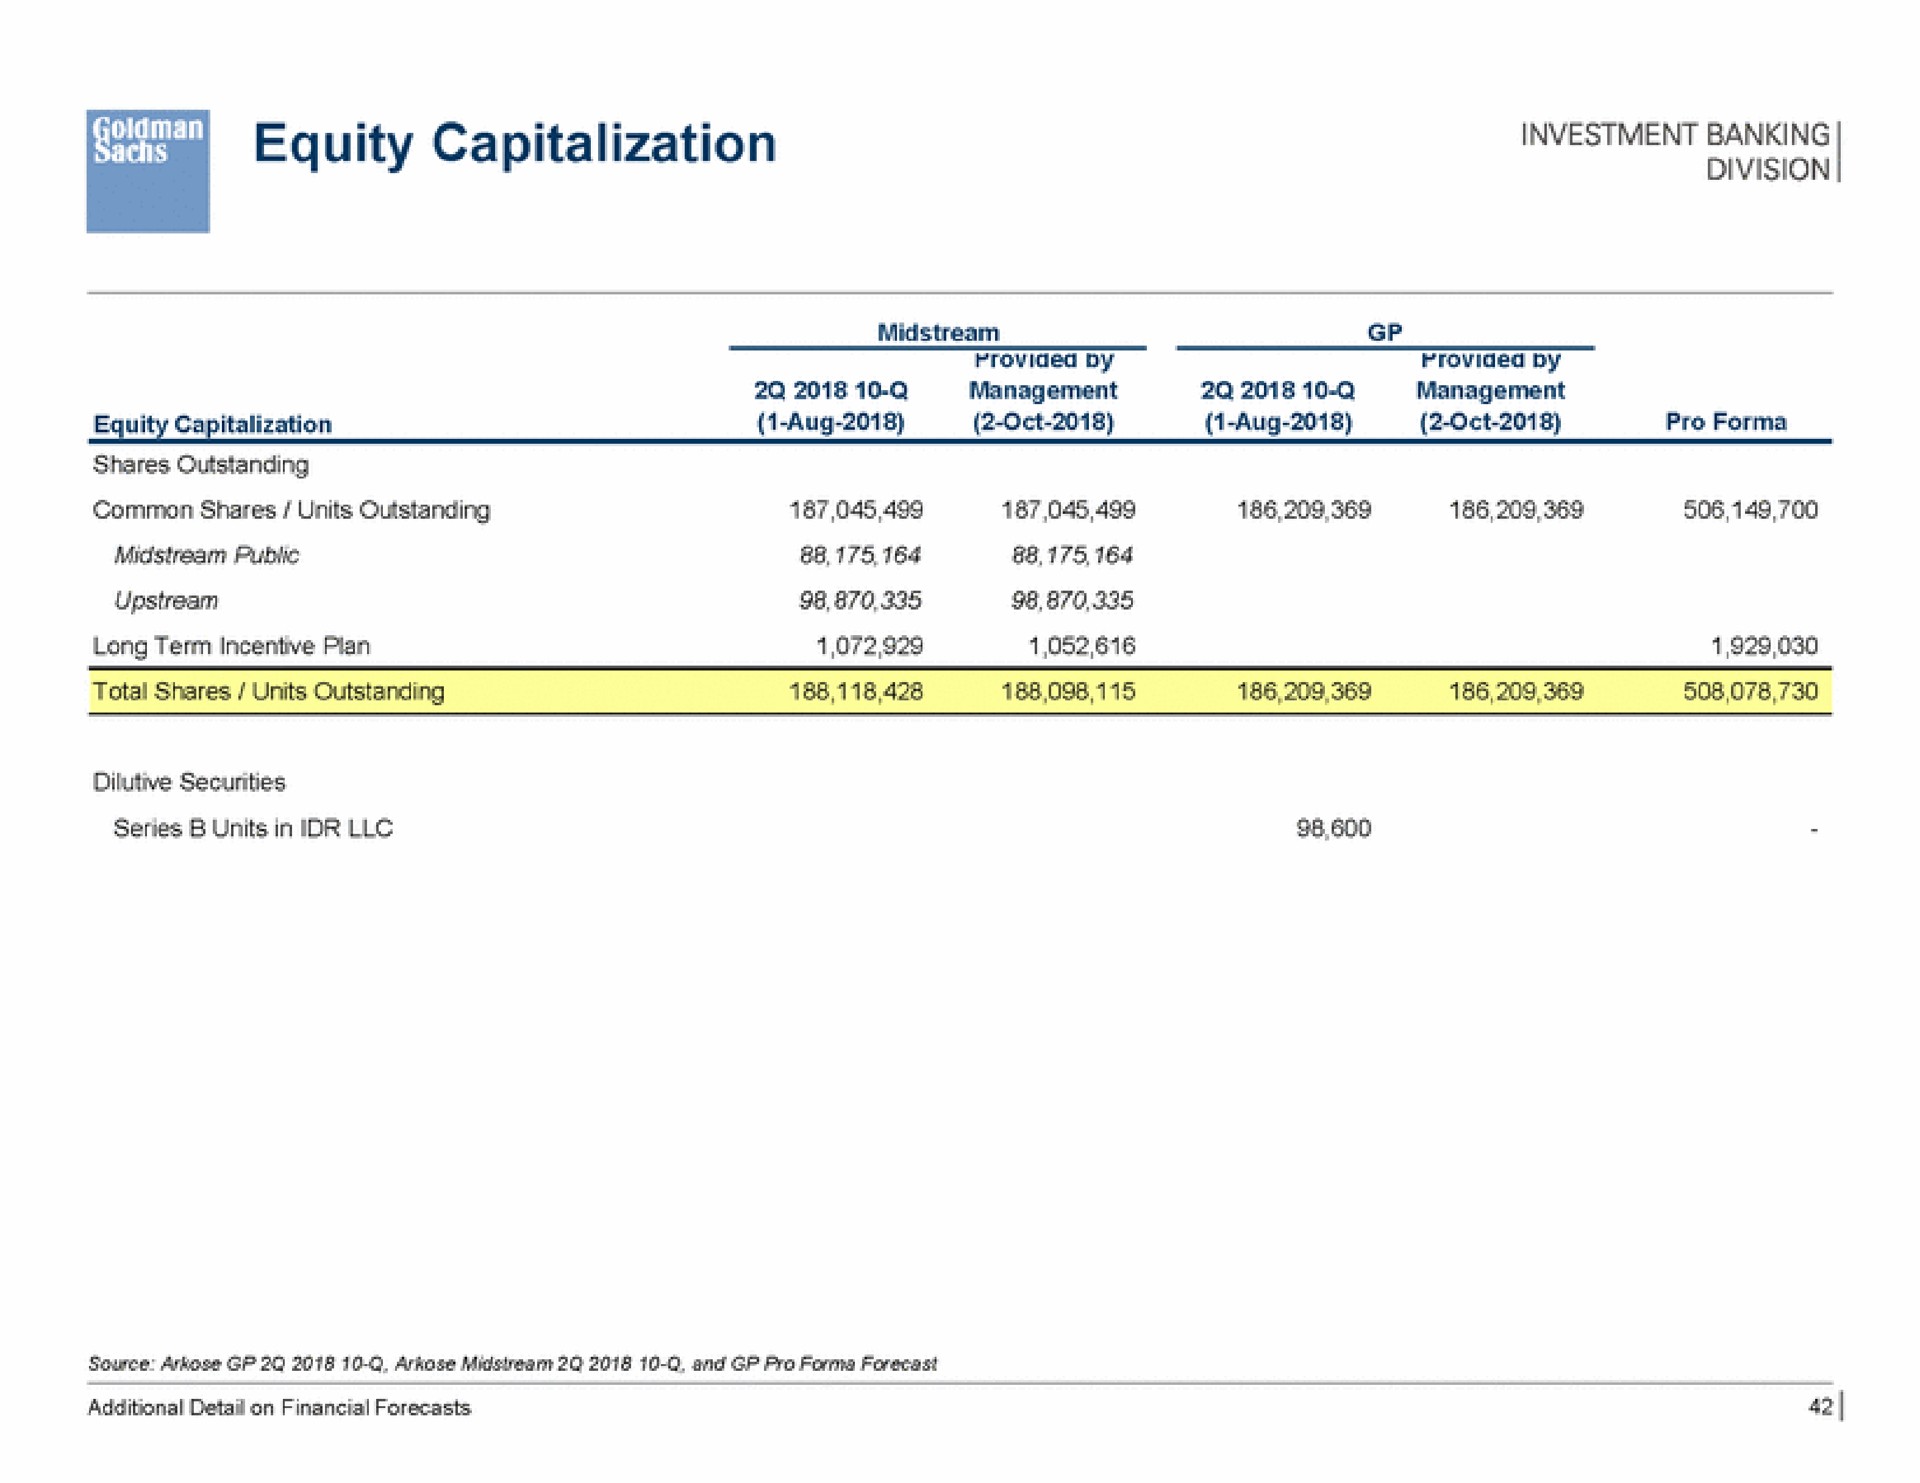 equity capitalization investment banking | Goldman Sachs